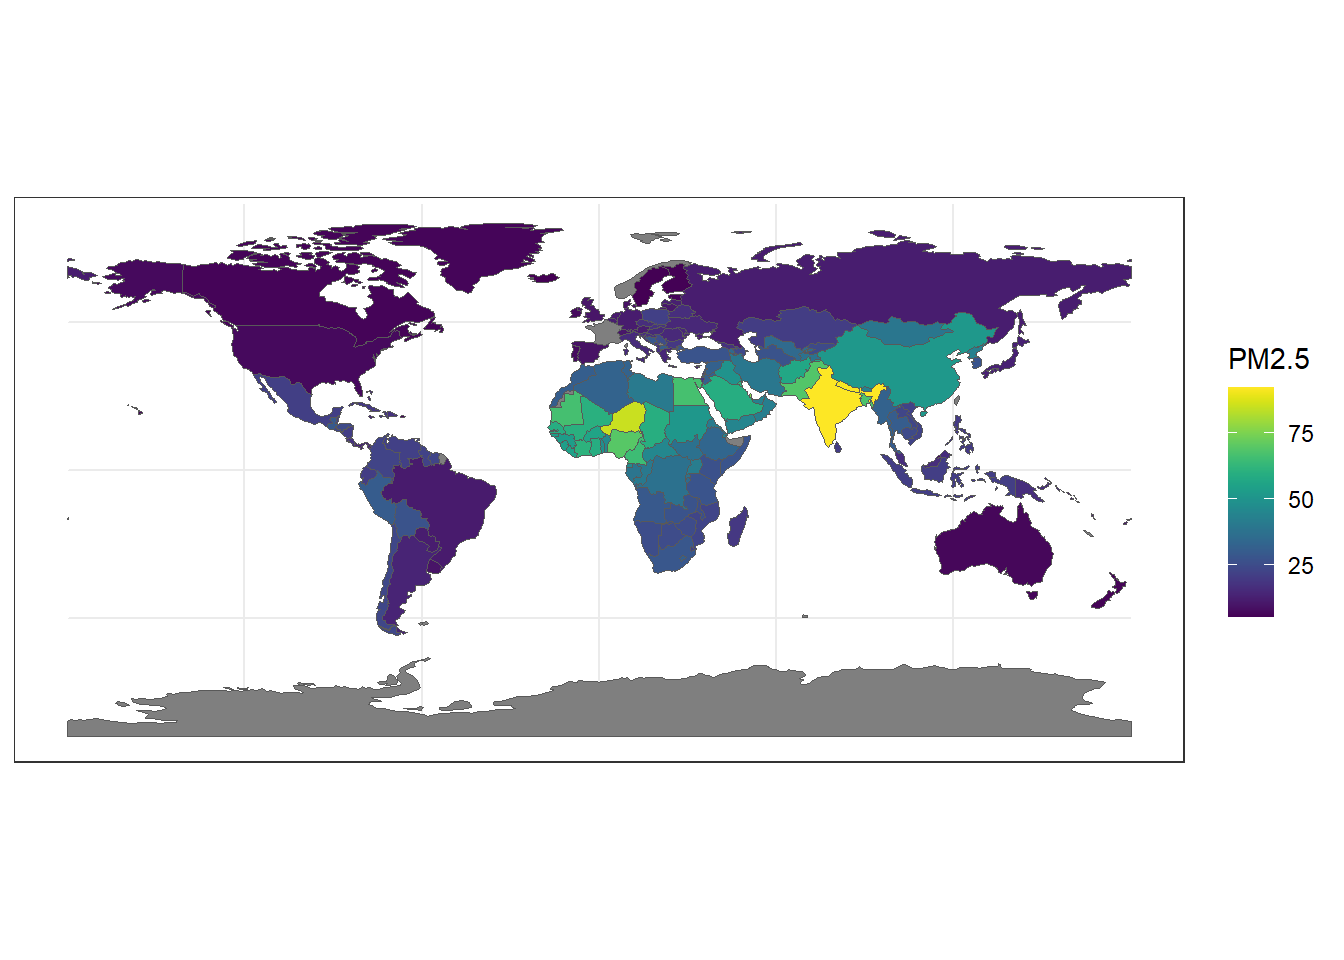 PM2.5 values in each of the world countries in 2016.